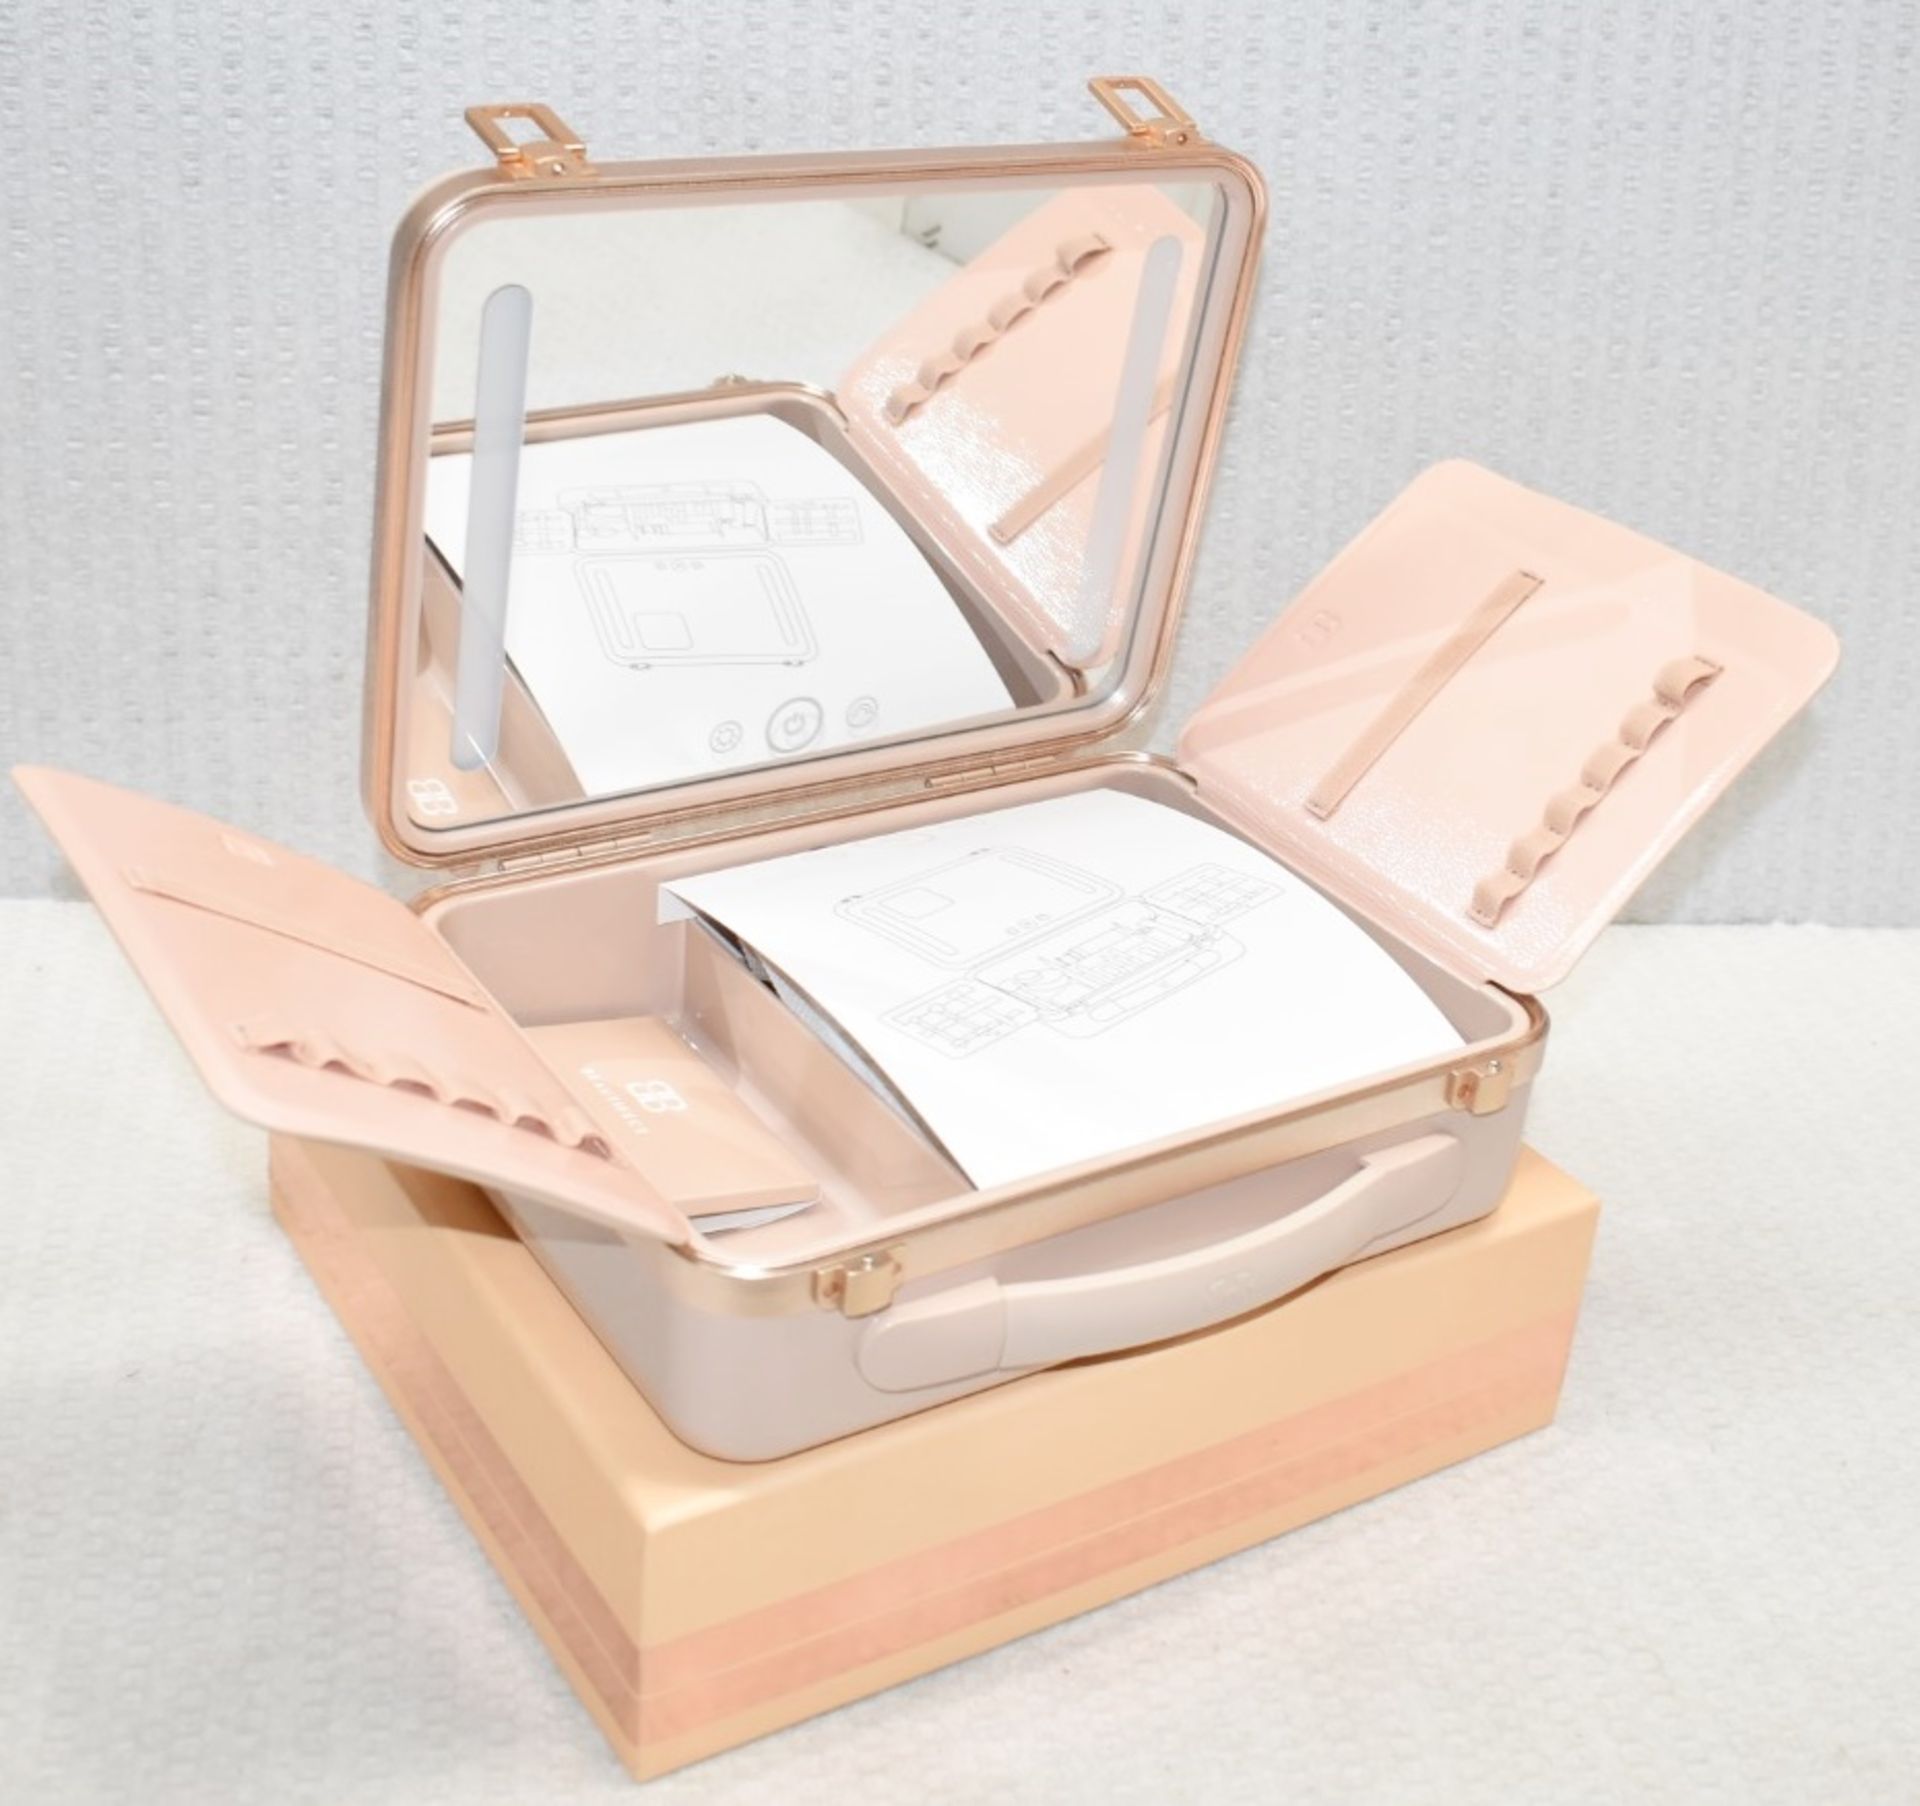 1 x BEAUTIFECT 'Beautifect Box' Make-Up Carry Case With Built-in Mirror - RRP £279.00 - Image 6 of 13